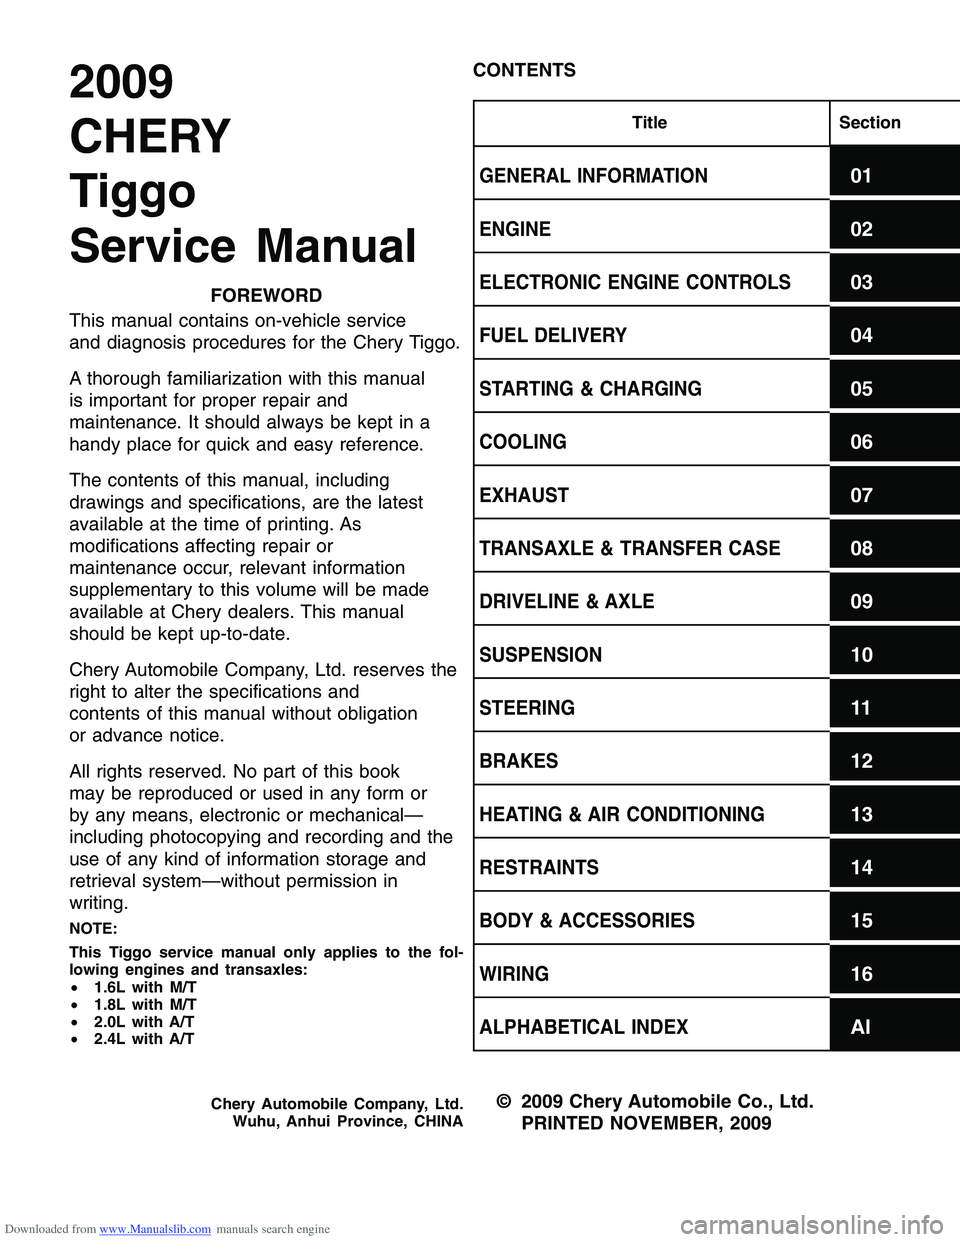 CHERY TIGGO 2009  Service Repair Manual Downloaded from www.Manualslib.com manuals search engine 2009
CHERY
Tiggo
Service Manual
FOREWORD
This manual contains on-vehicle service
and diagnosis procedures for the Chery Tiggo.
A thorough famil